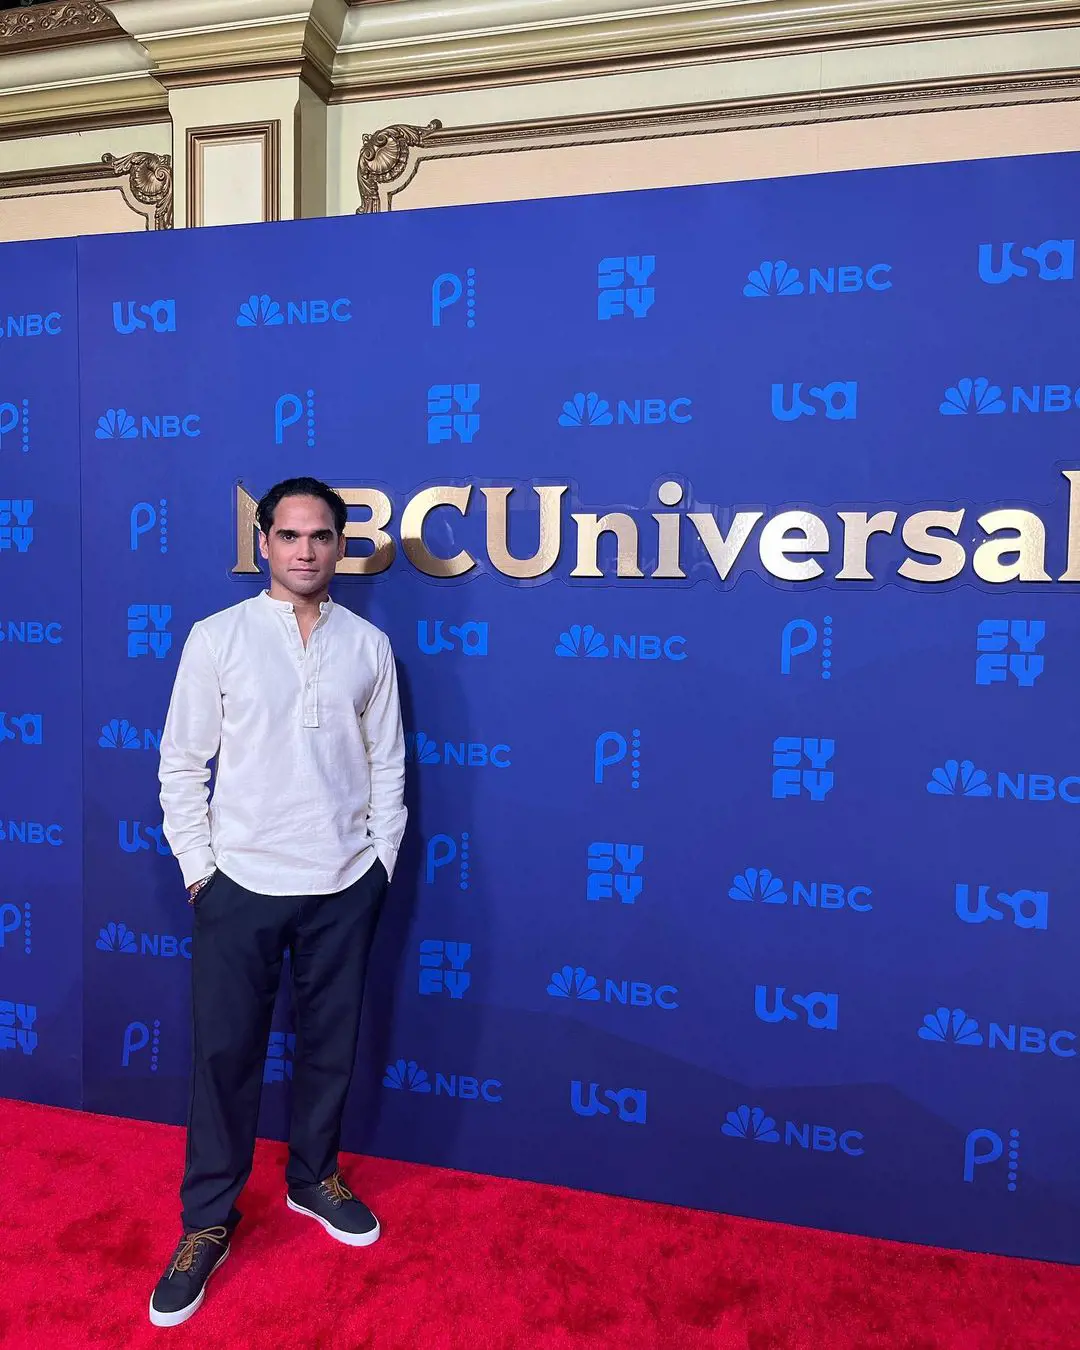 Reece at the nbc universal to promote The Ark